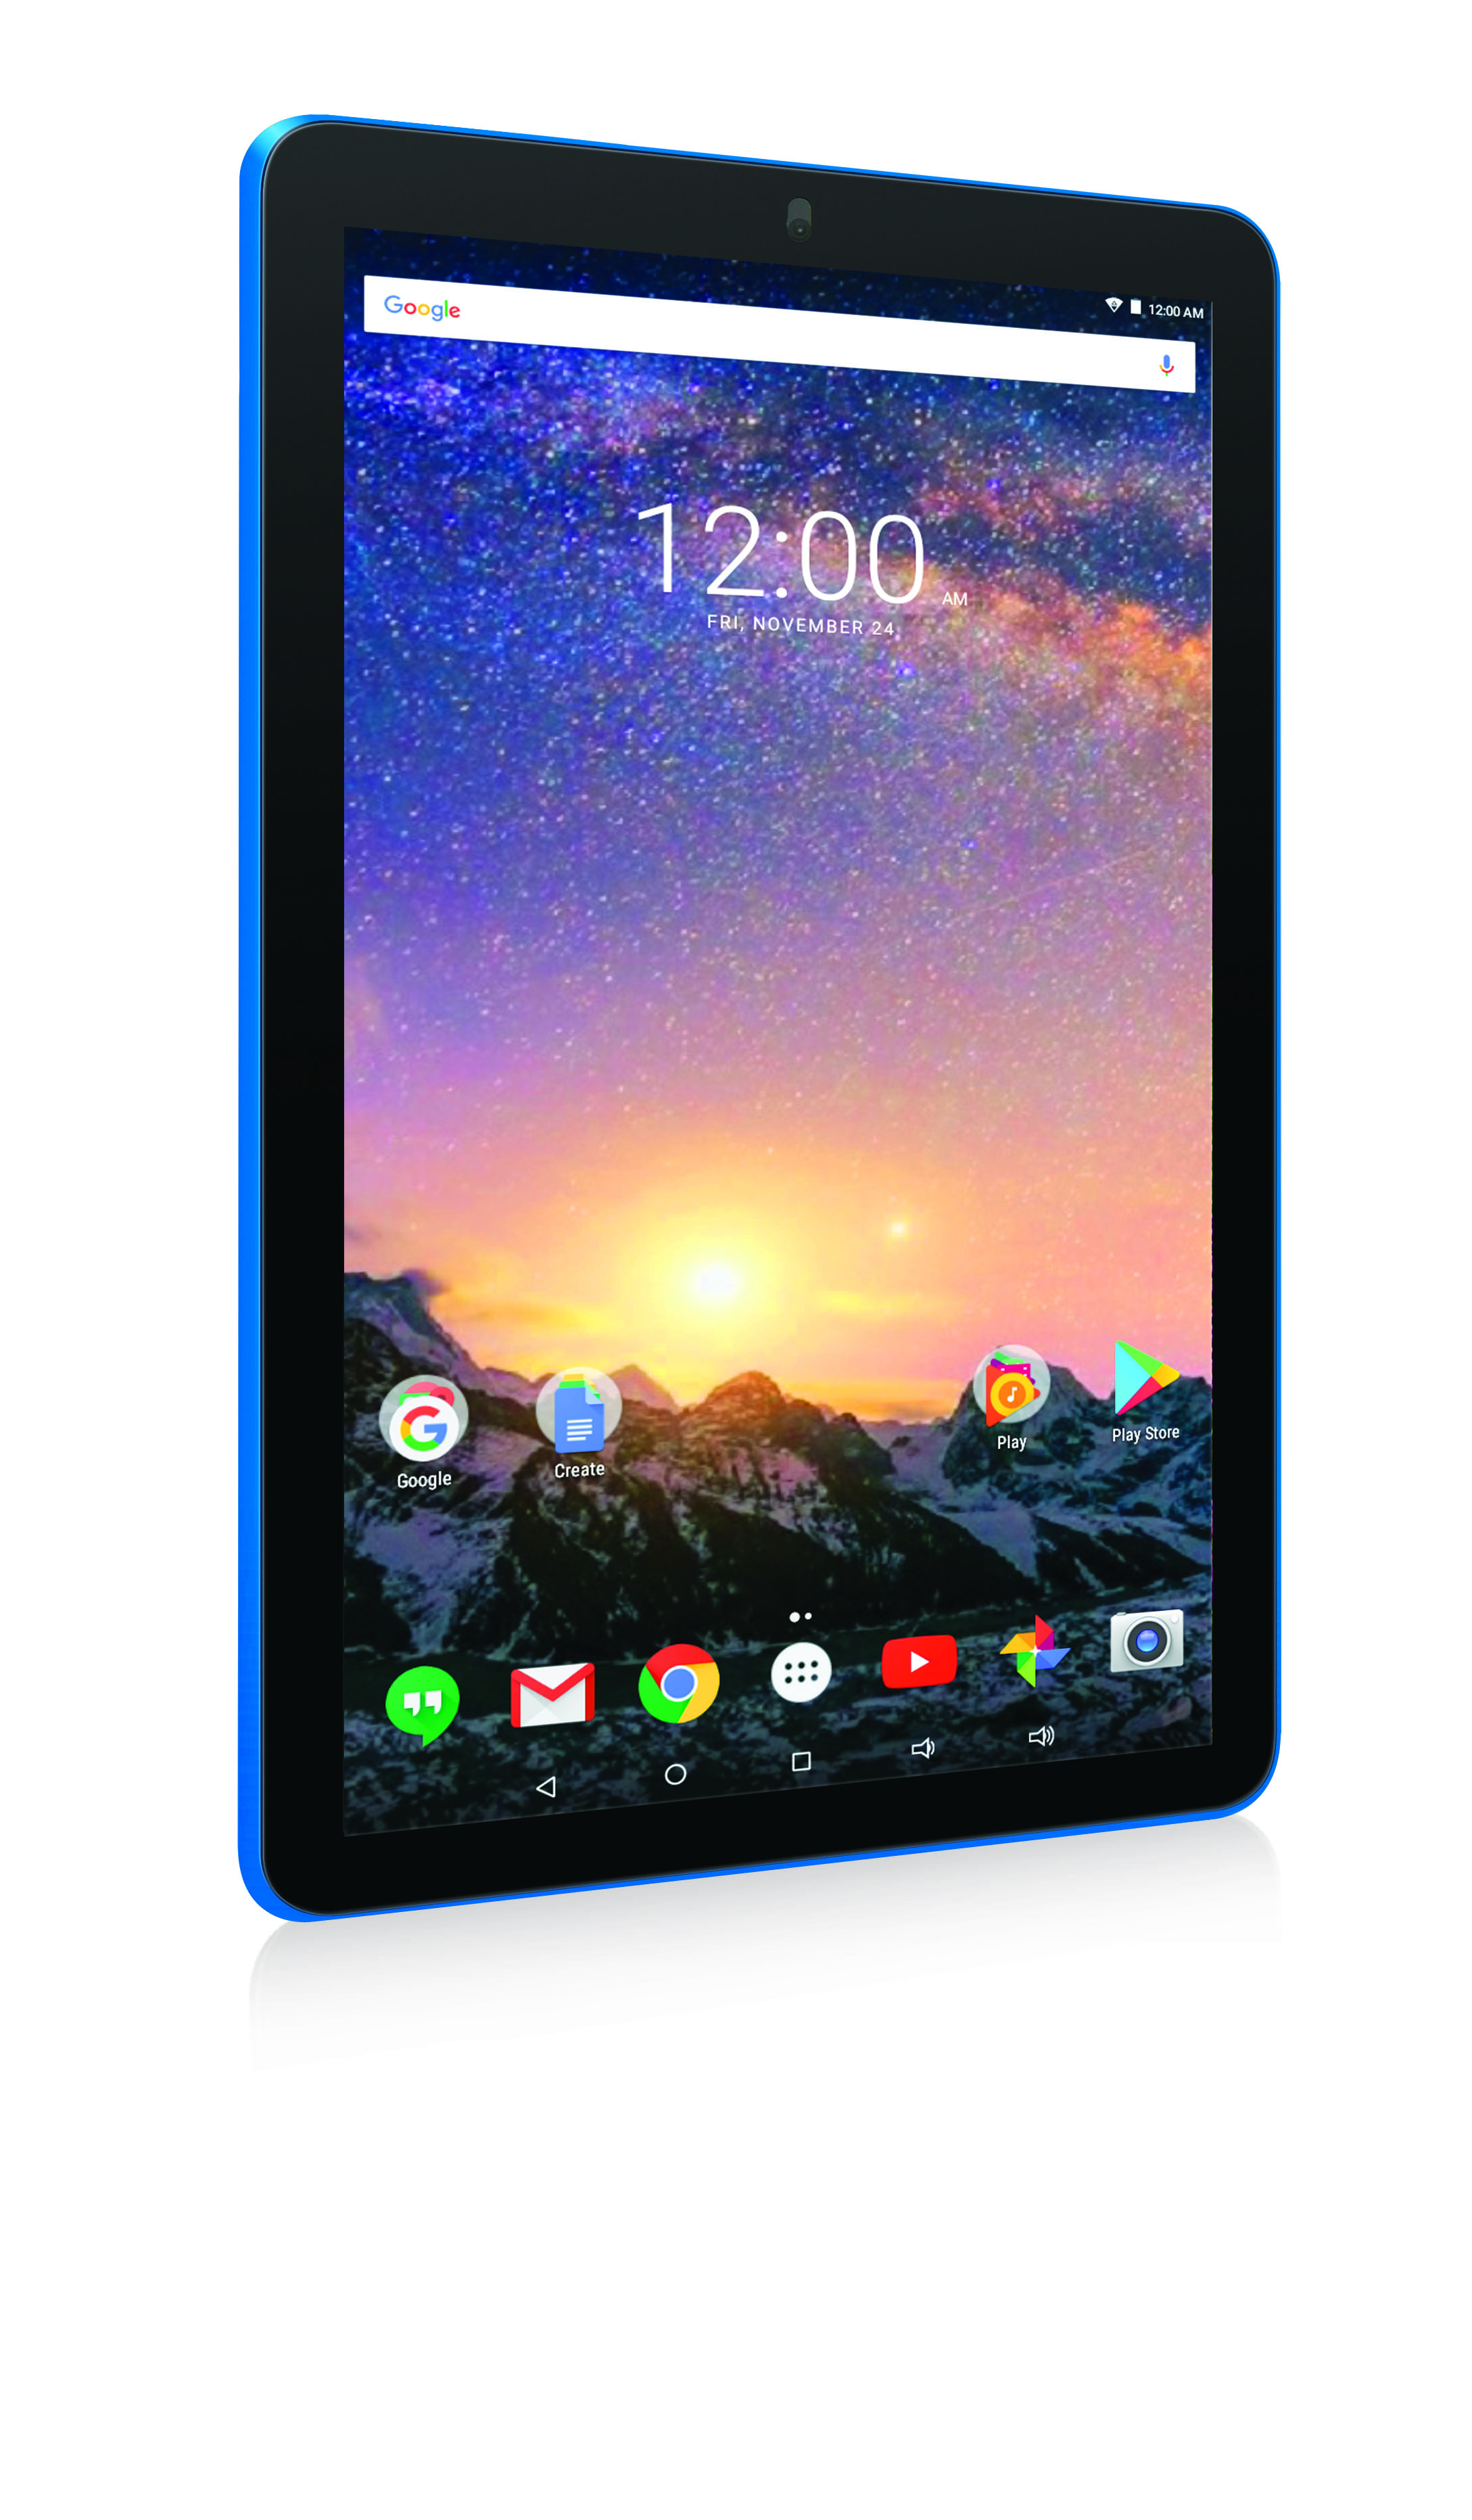 RCA Galileo Pro 11.5" 32GB 2-in-1 Tablet with Keyboard Case Android OS, Blue (Google Classroom Ready) - image 4 of 5